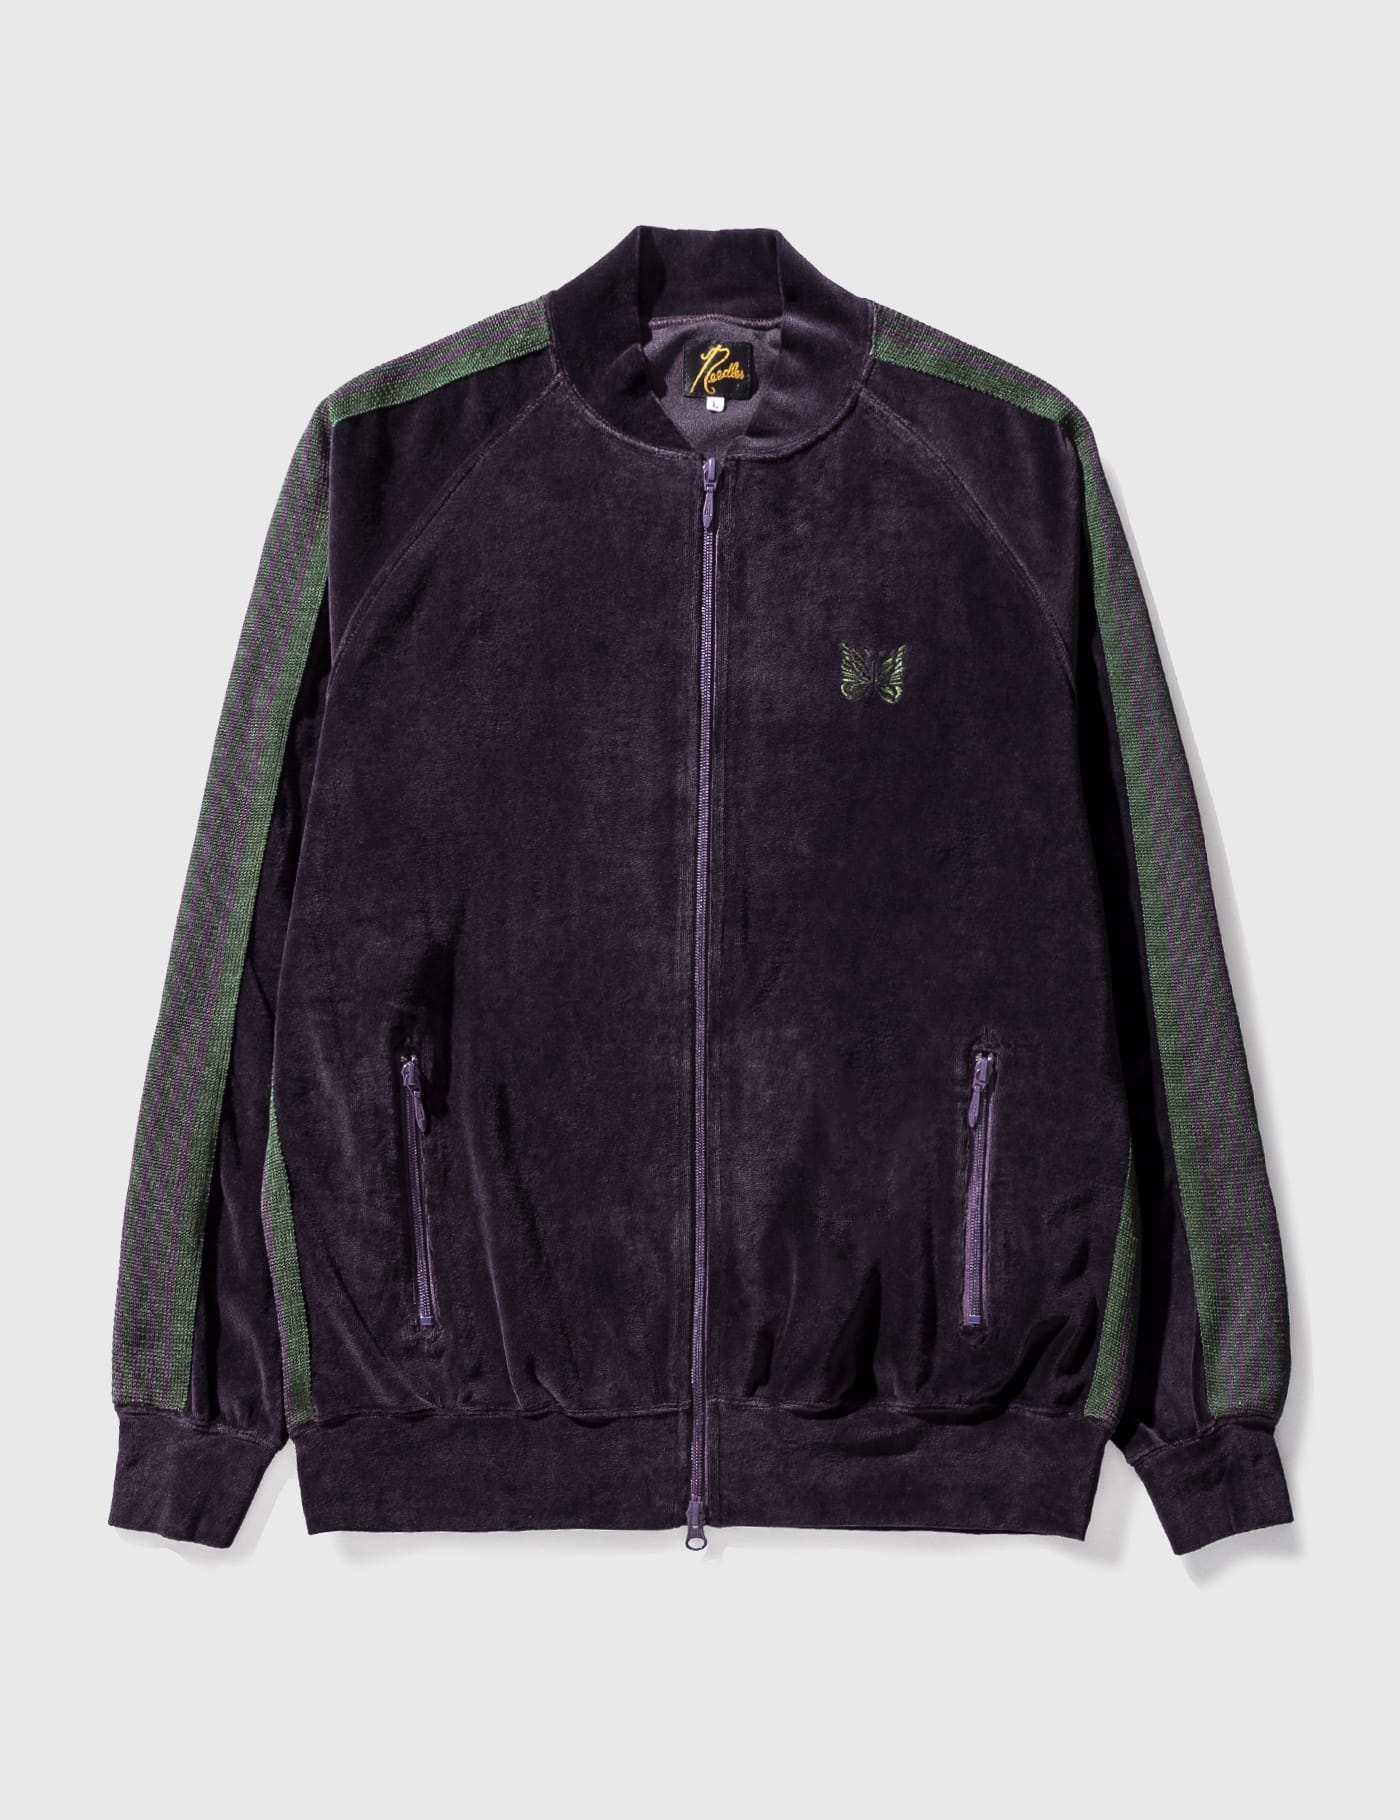 Needles - Velour Track Jacket | HBX - Globally Curated Fashion and